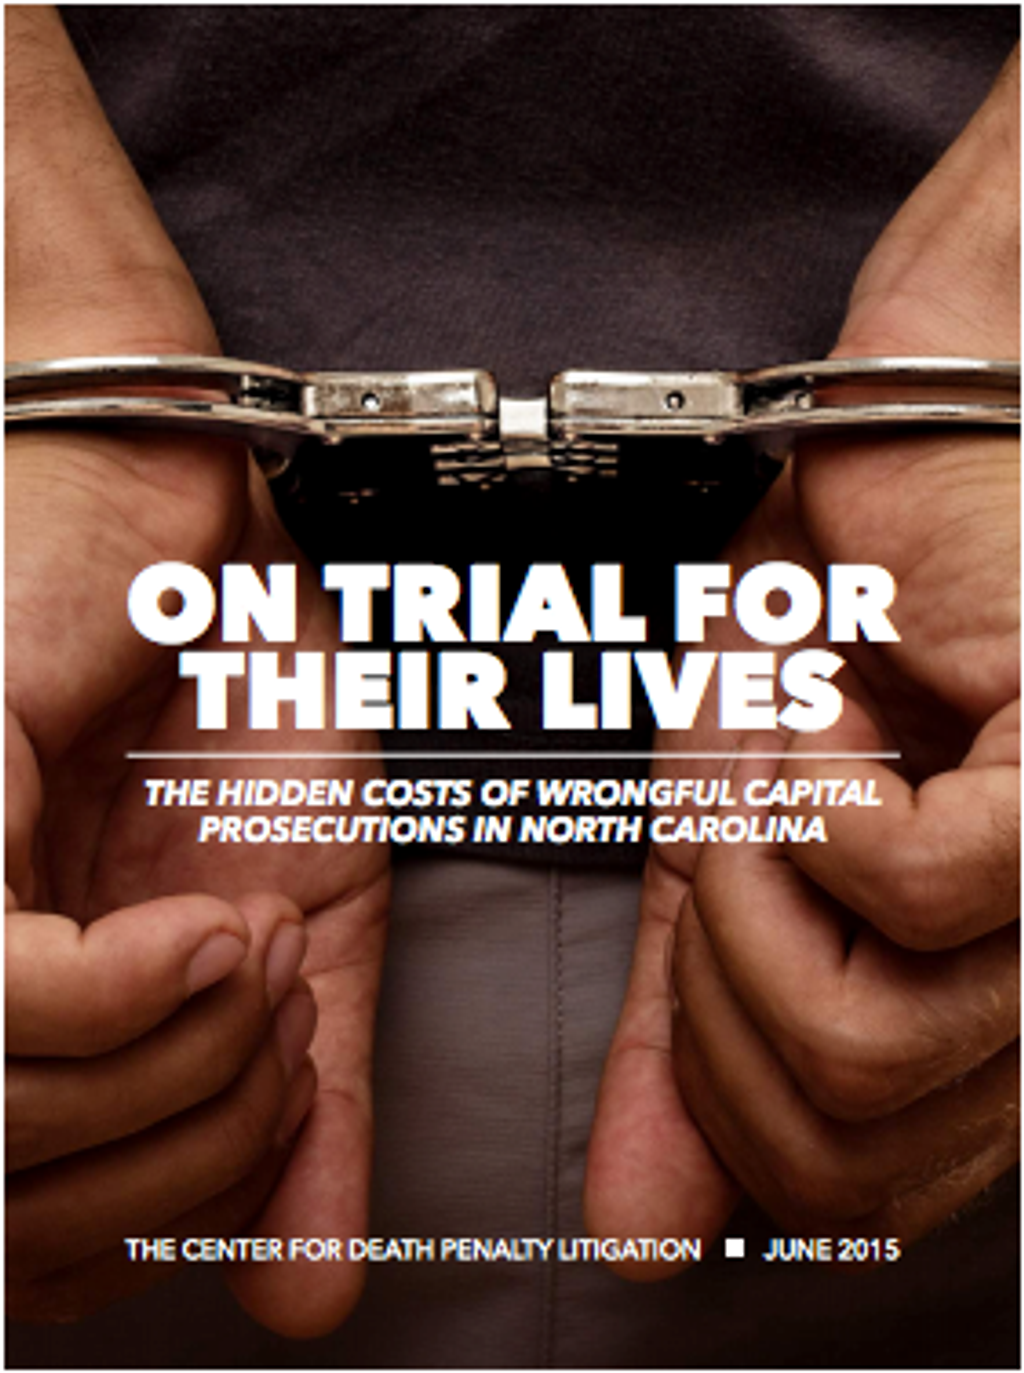 STUDY: "The Hidden Costs of Wrongful Capital Prosecutions in North Carolina"